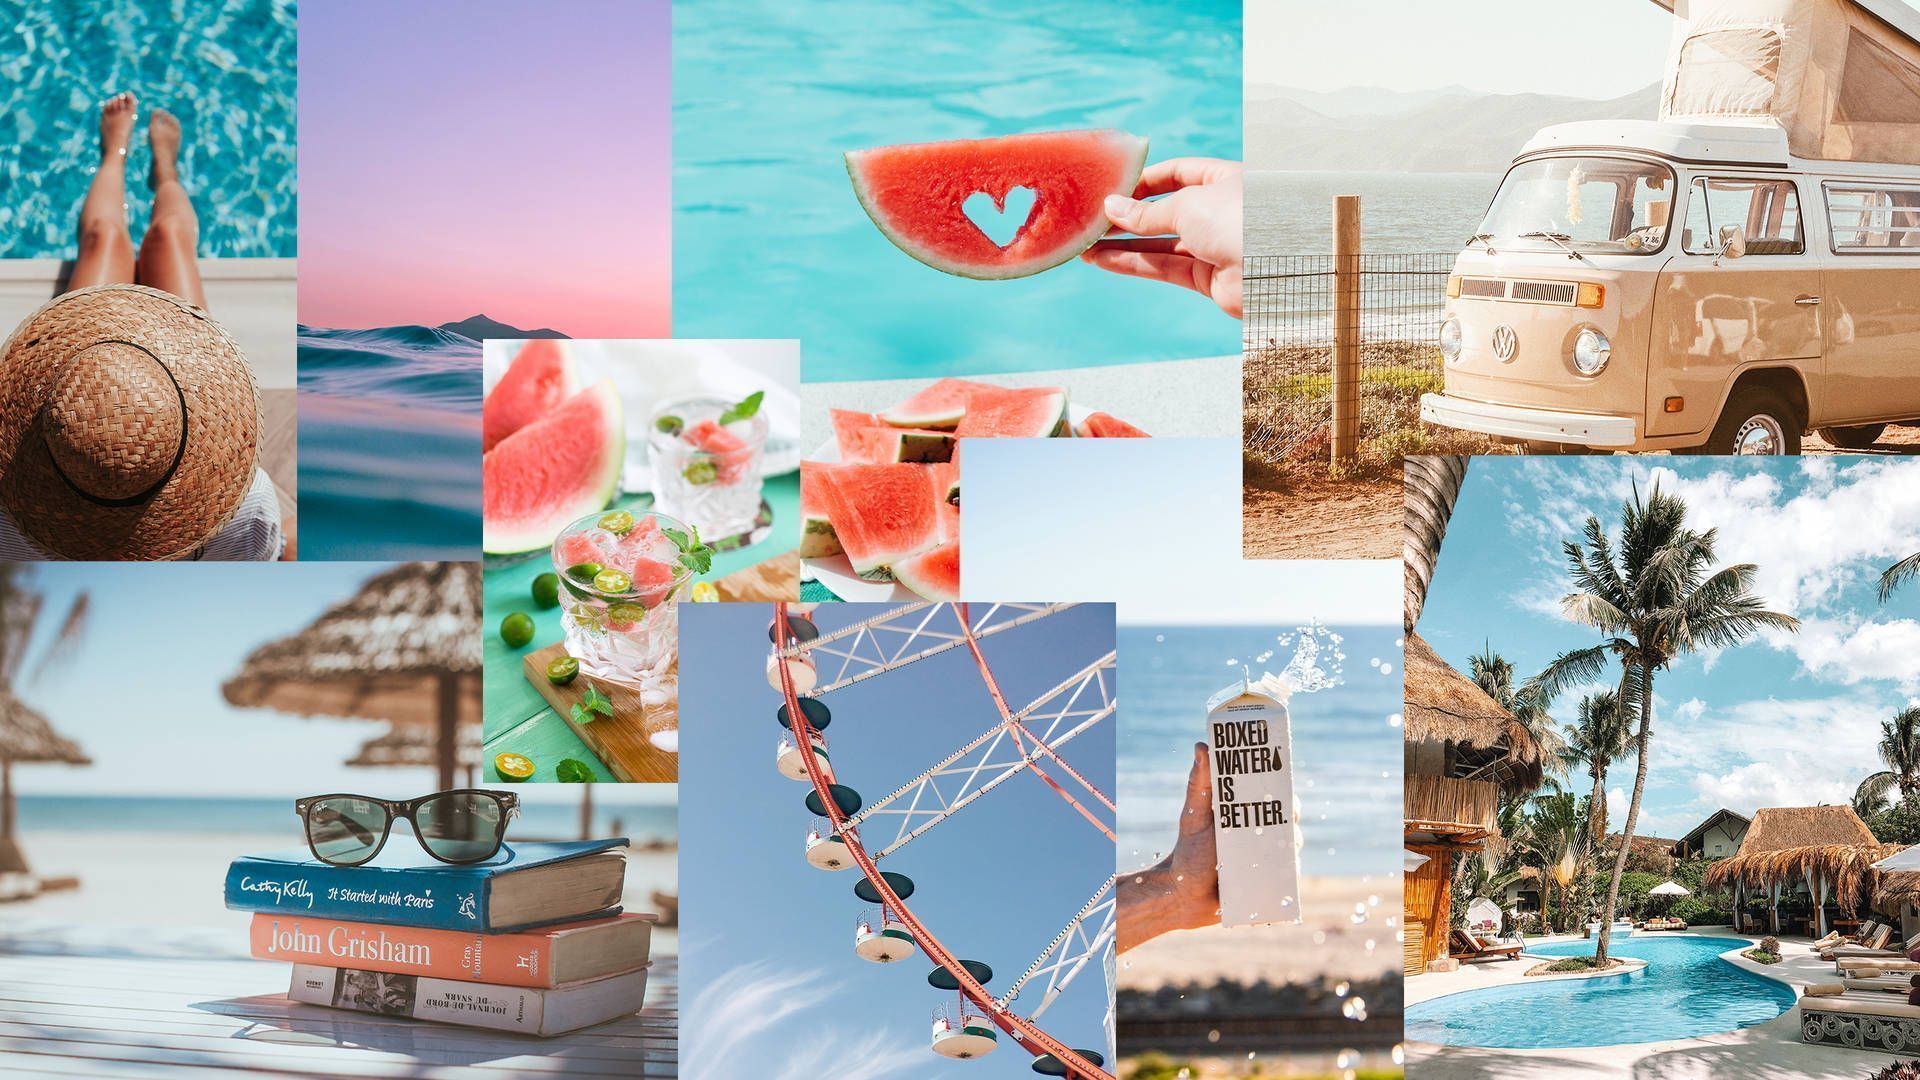 Download 2560x1440 Summer Aesthetic Collage Wallpaper